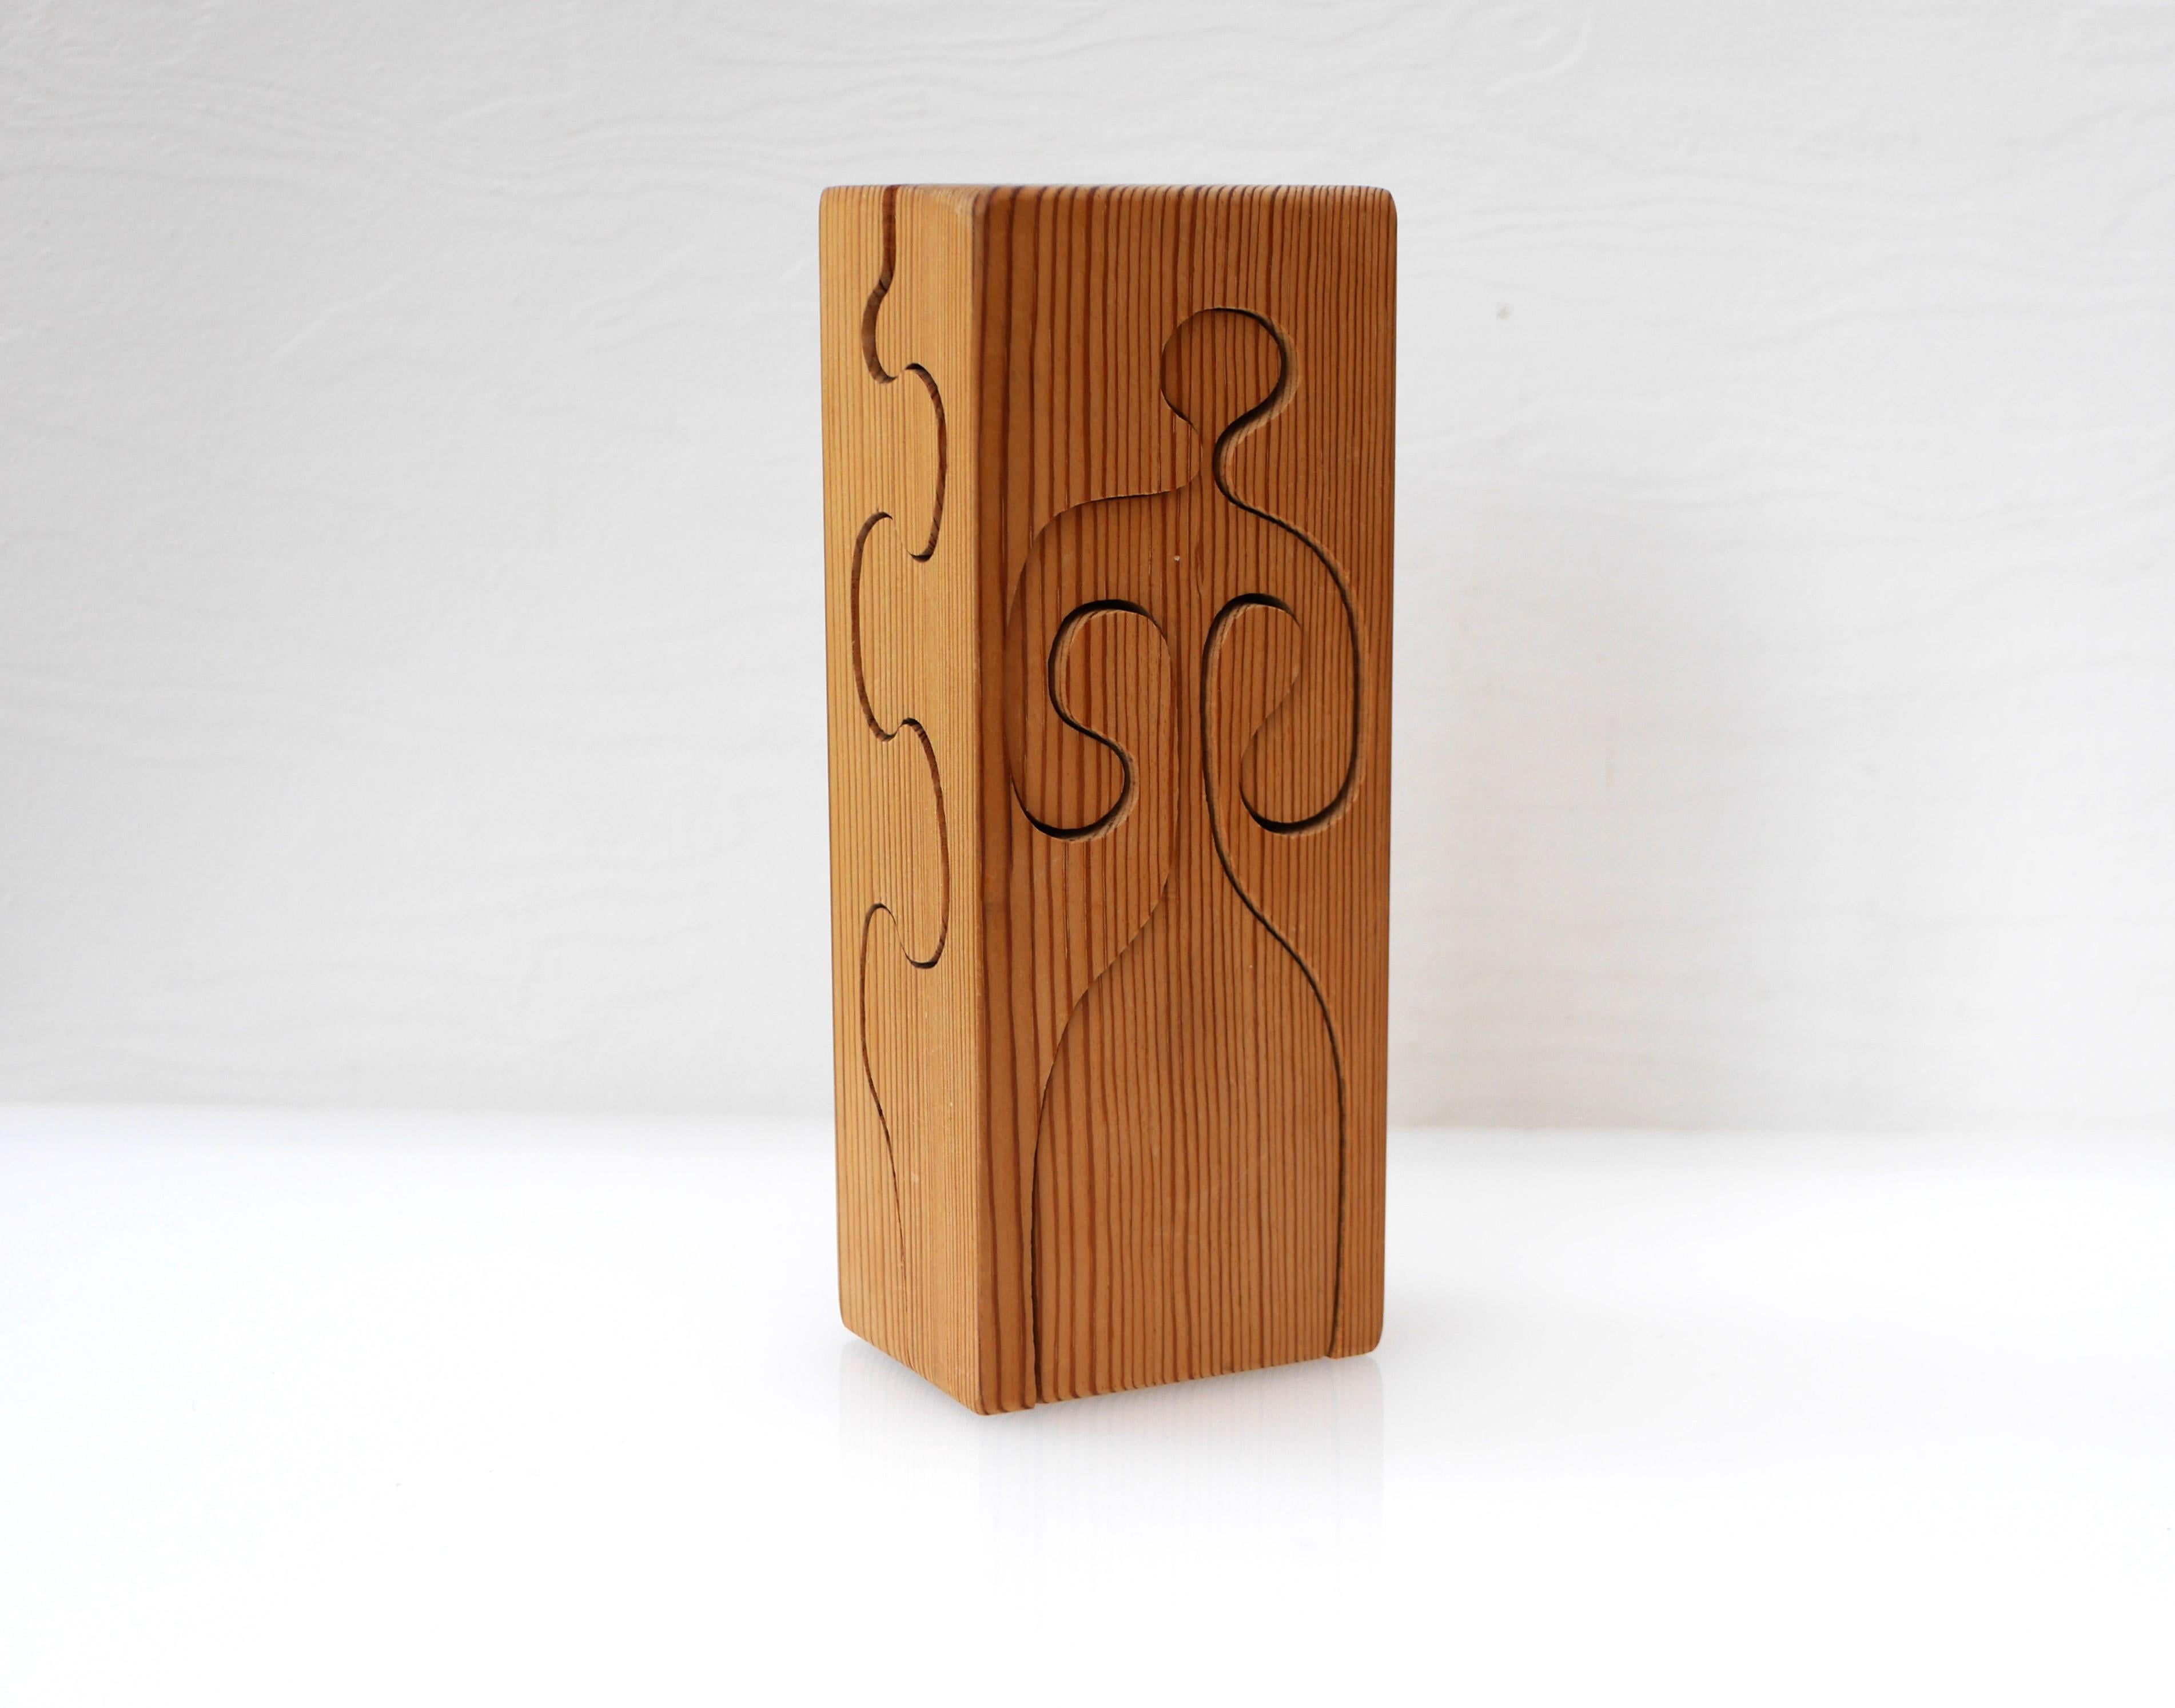 Mid-Century Modern Wooden Puzzle Sculpture by Gunnar Kanevad for Gamla Linköping Sweden, 1962 For Sale